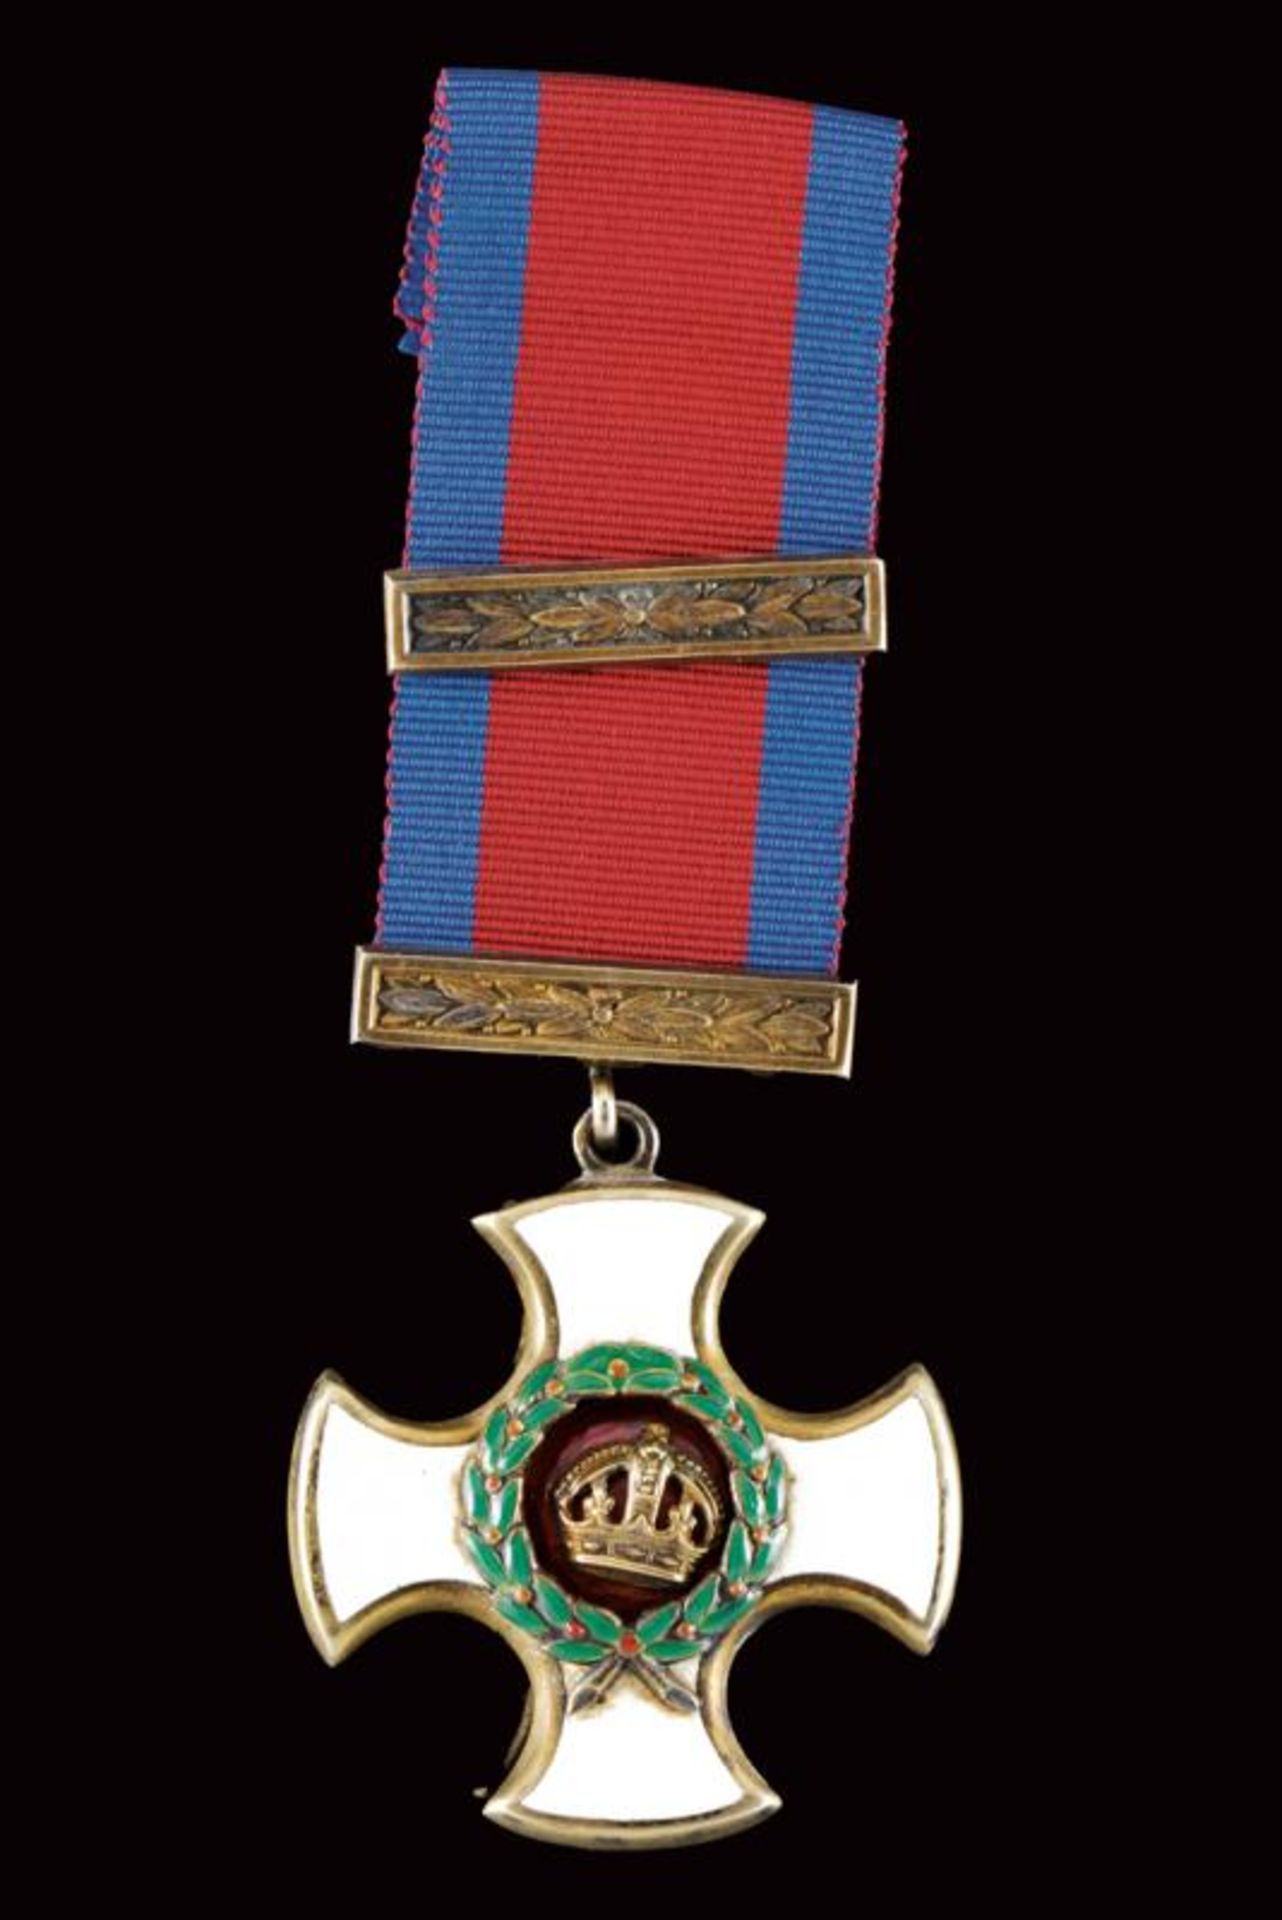 Distinguished Service Order (1886 - today)